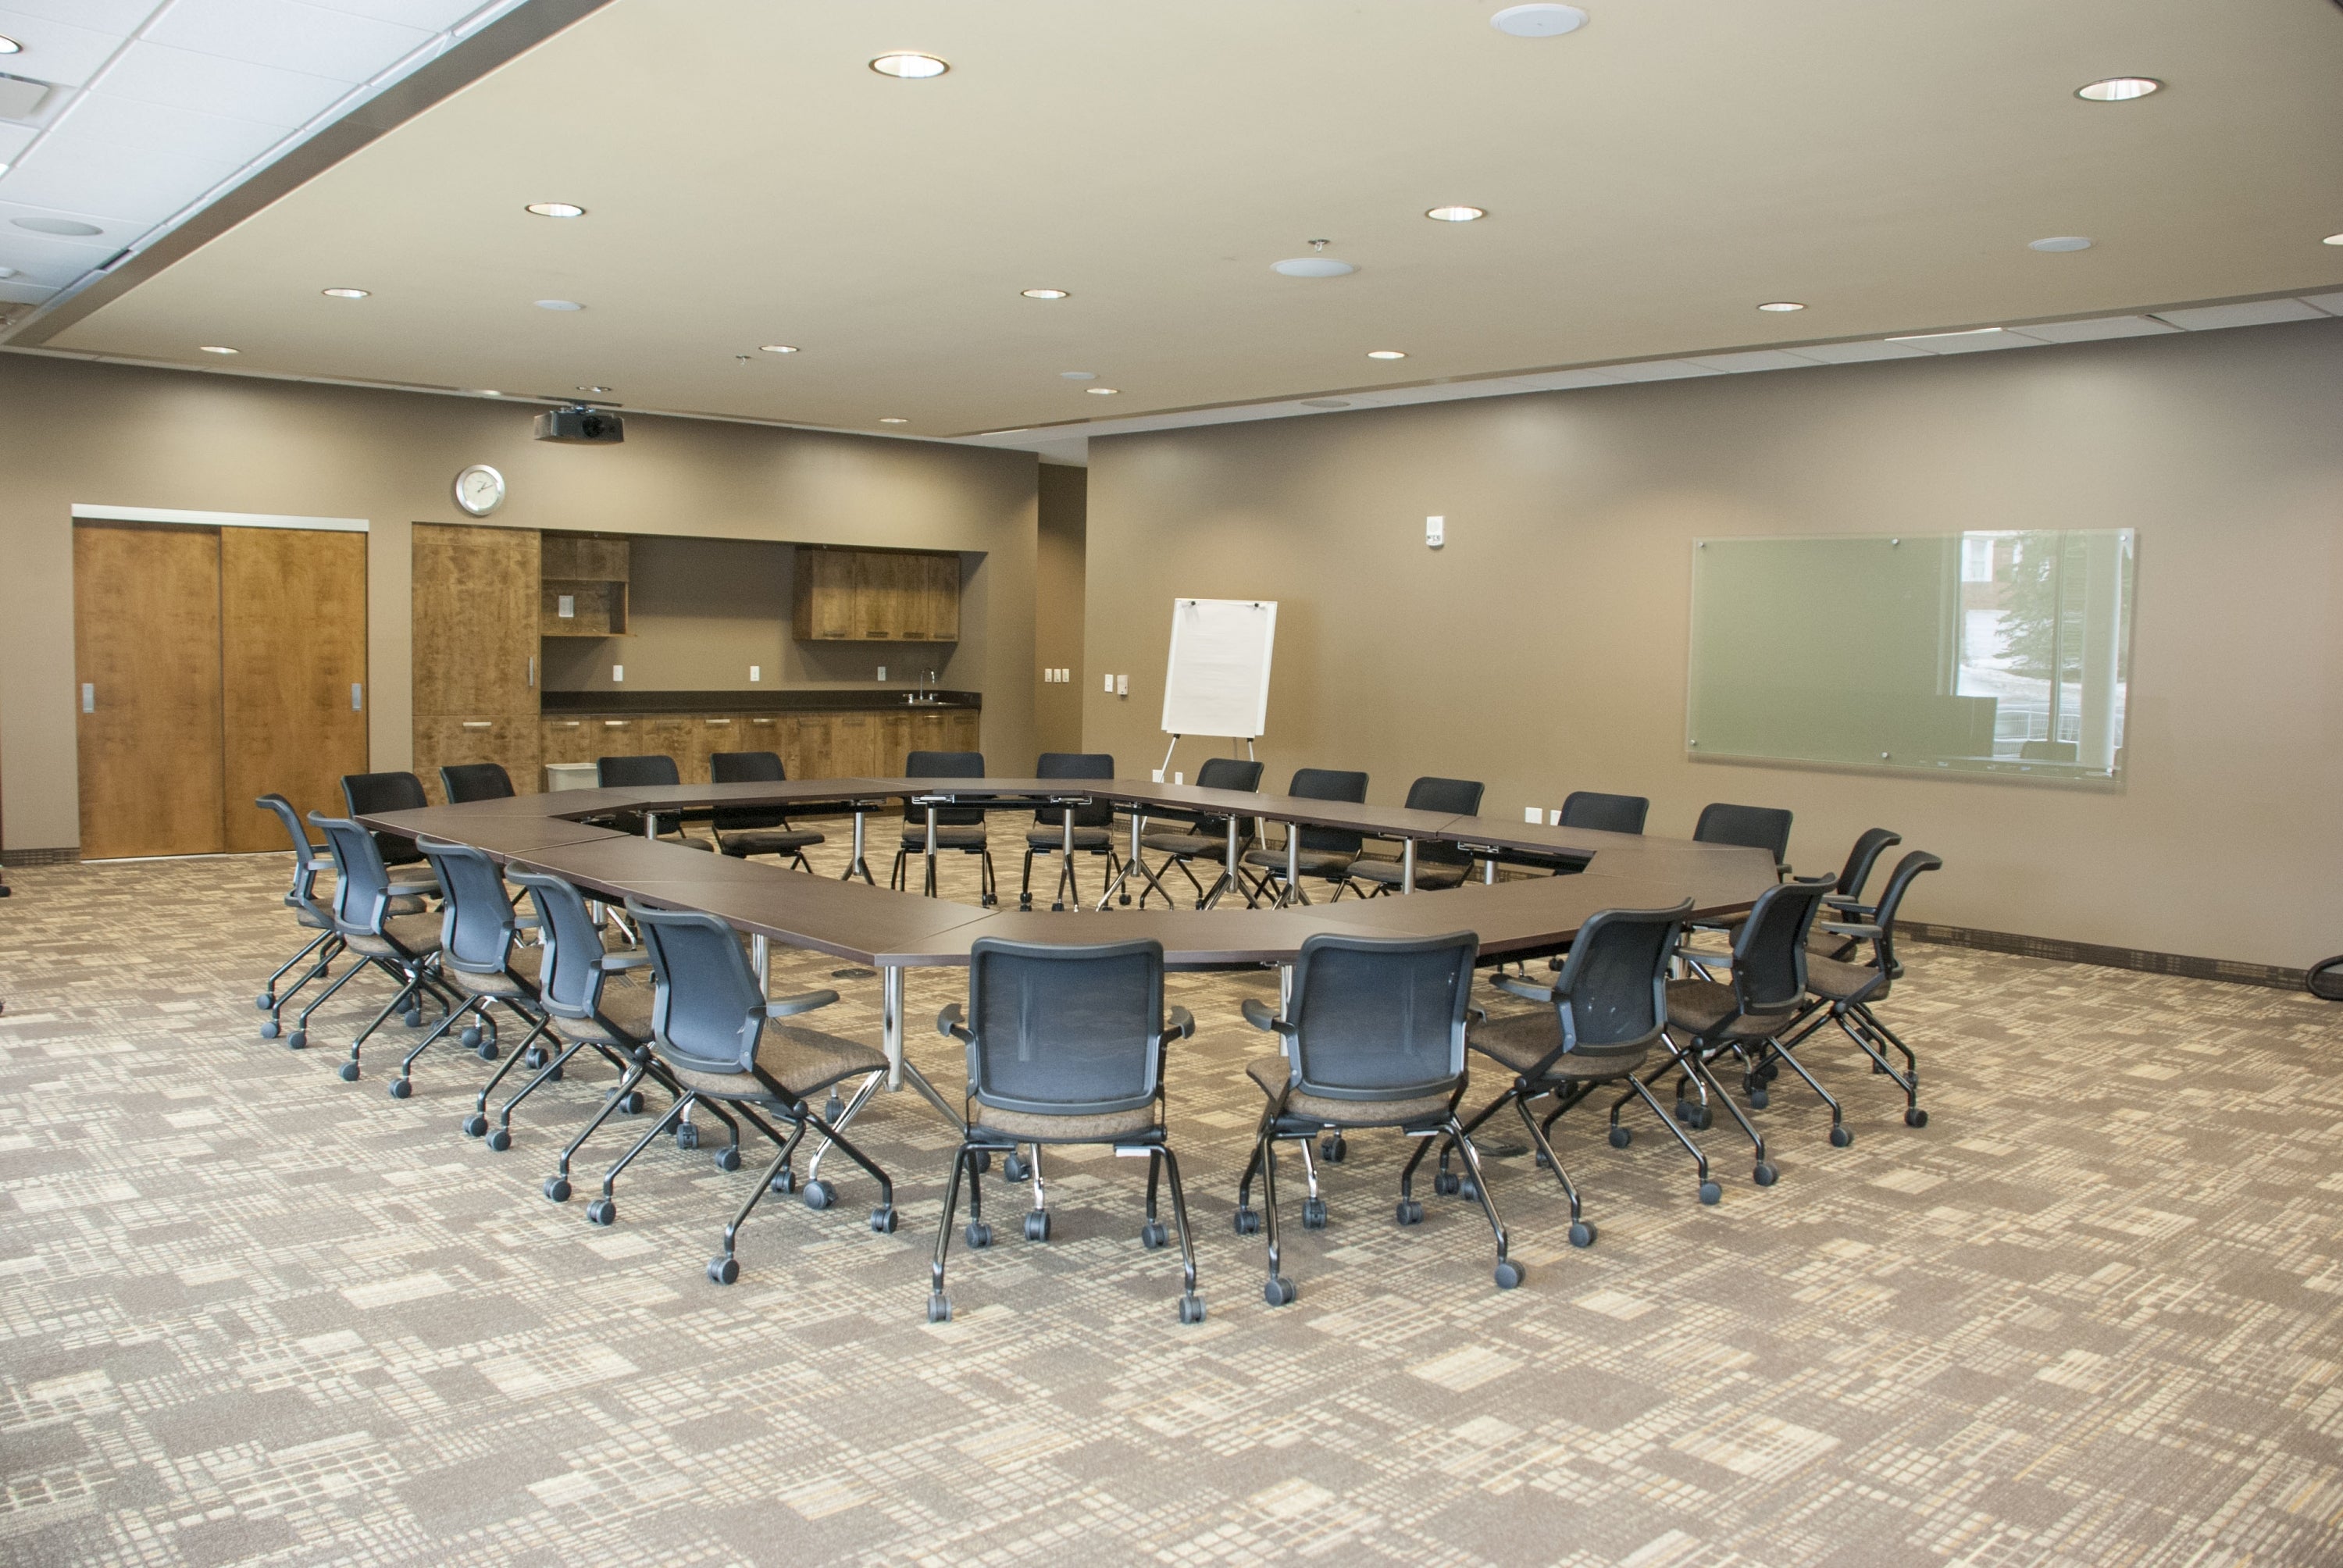 Large room with movable tables and chairs